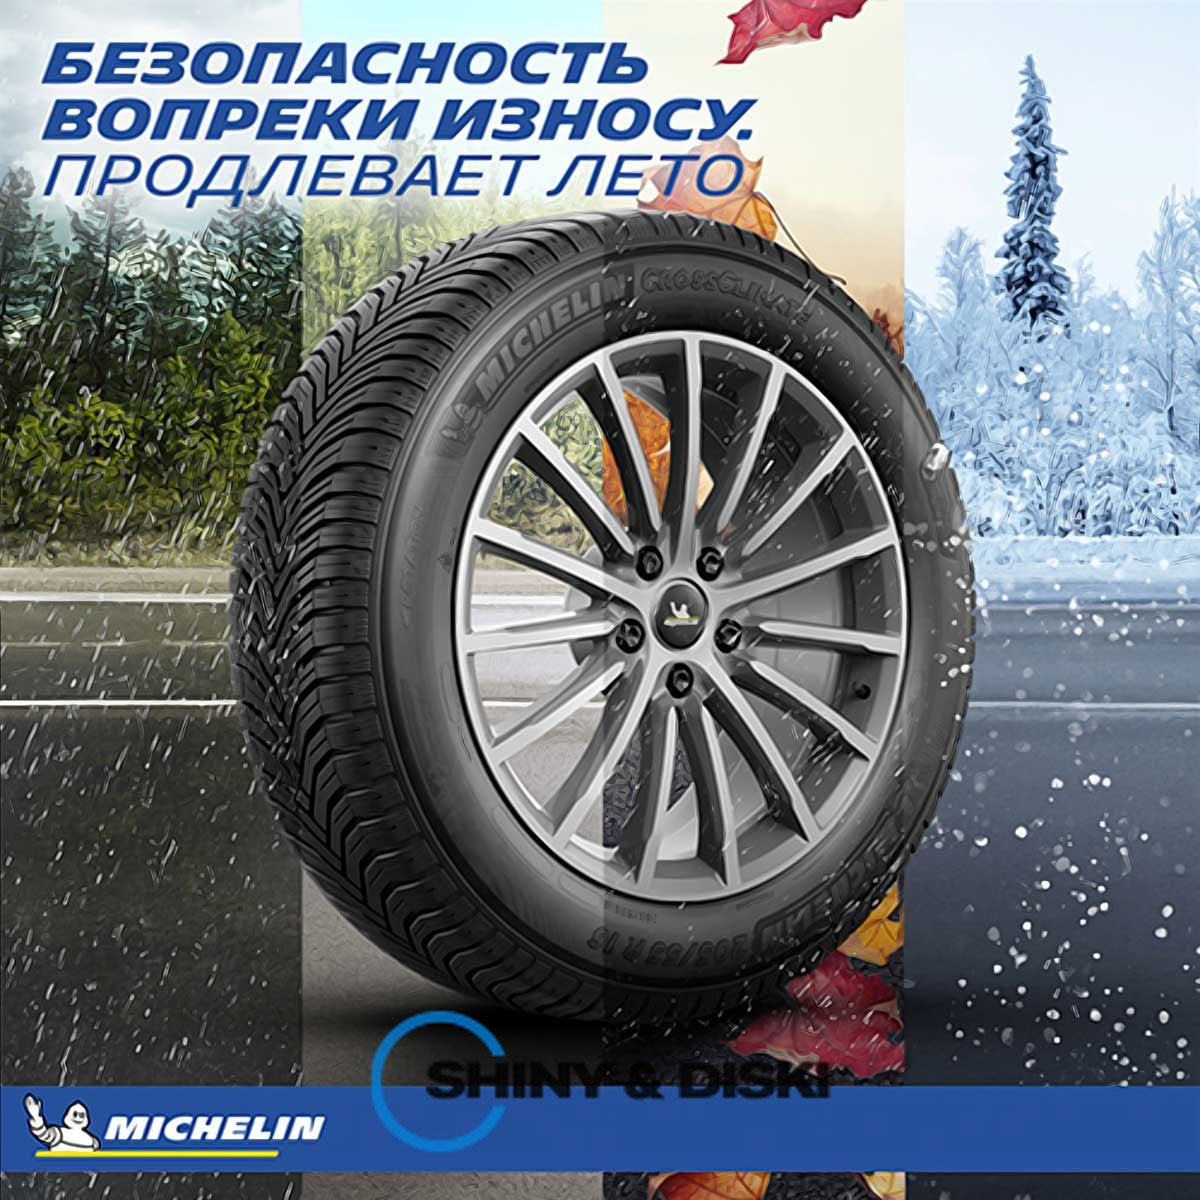 покрышки michelin cross climate+ 175/60 r15 85h xl